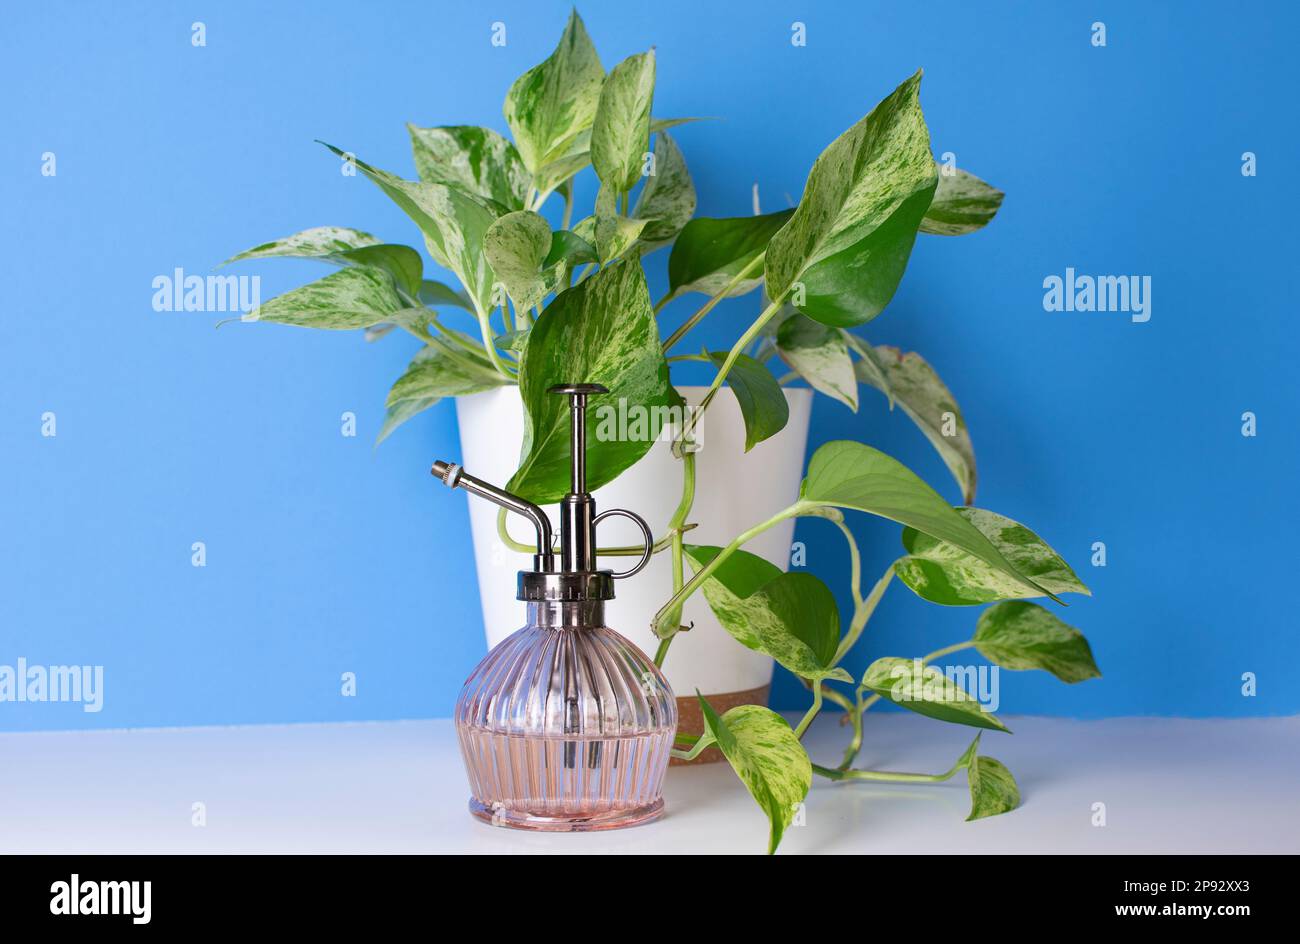 Snow Queen Pothos house plant. Variegated house plant. Popular plant. House plant care Stock Photo